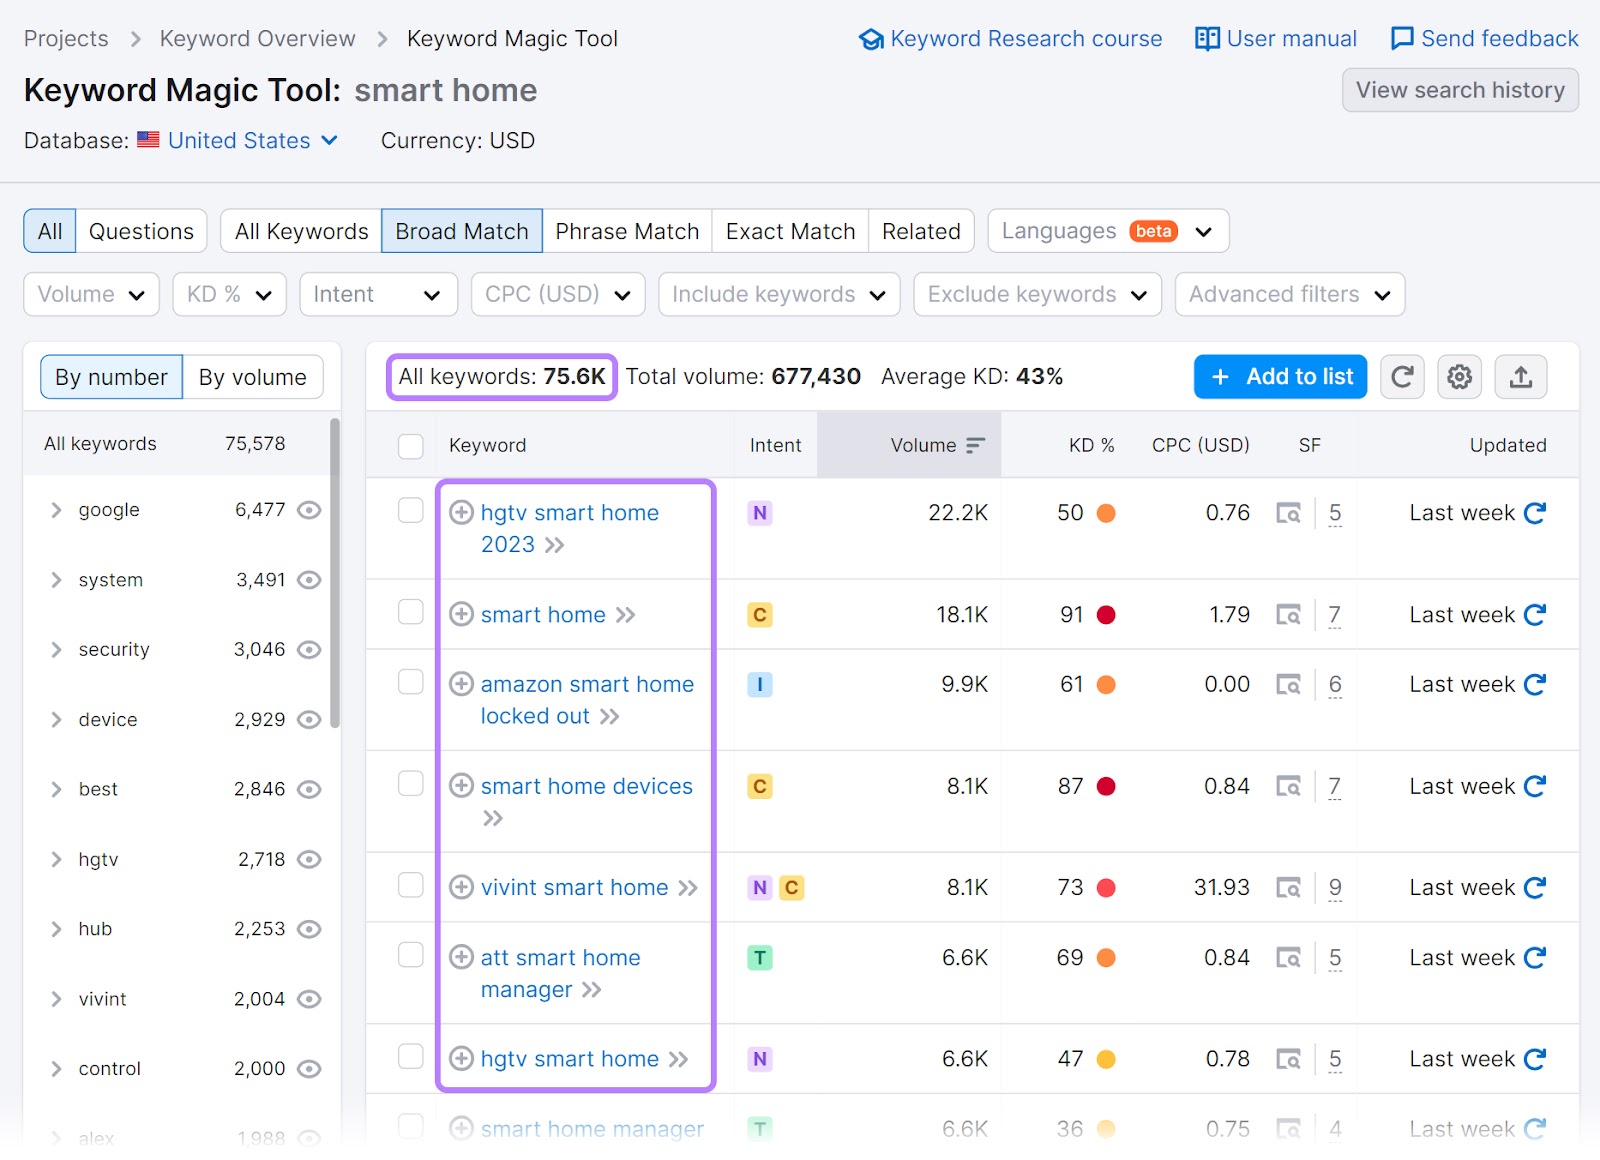 Keyword Magic Tool results for "smart home"